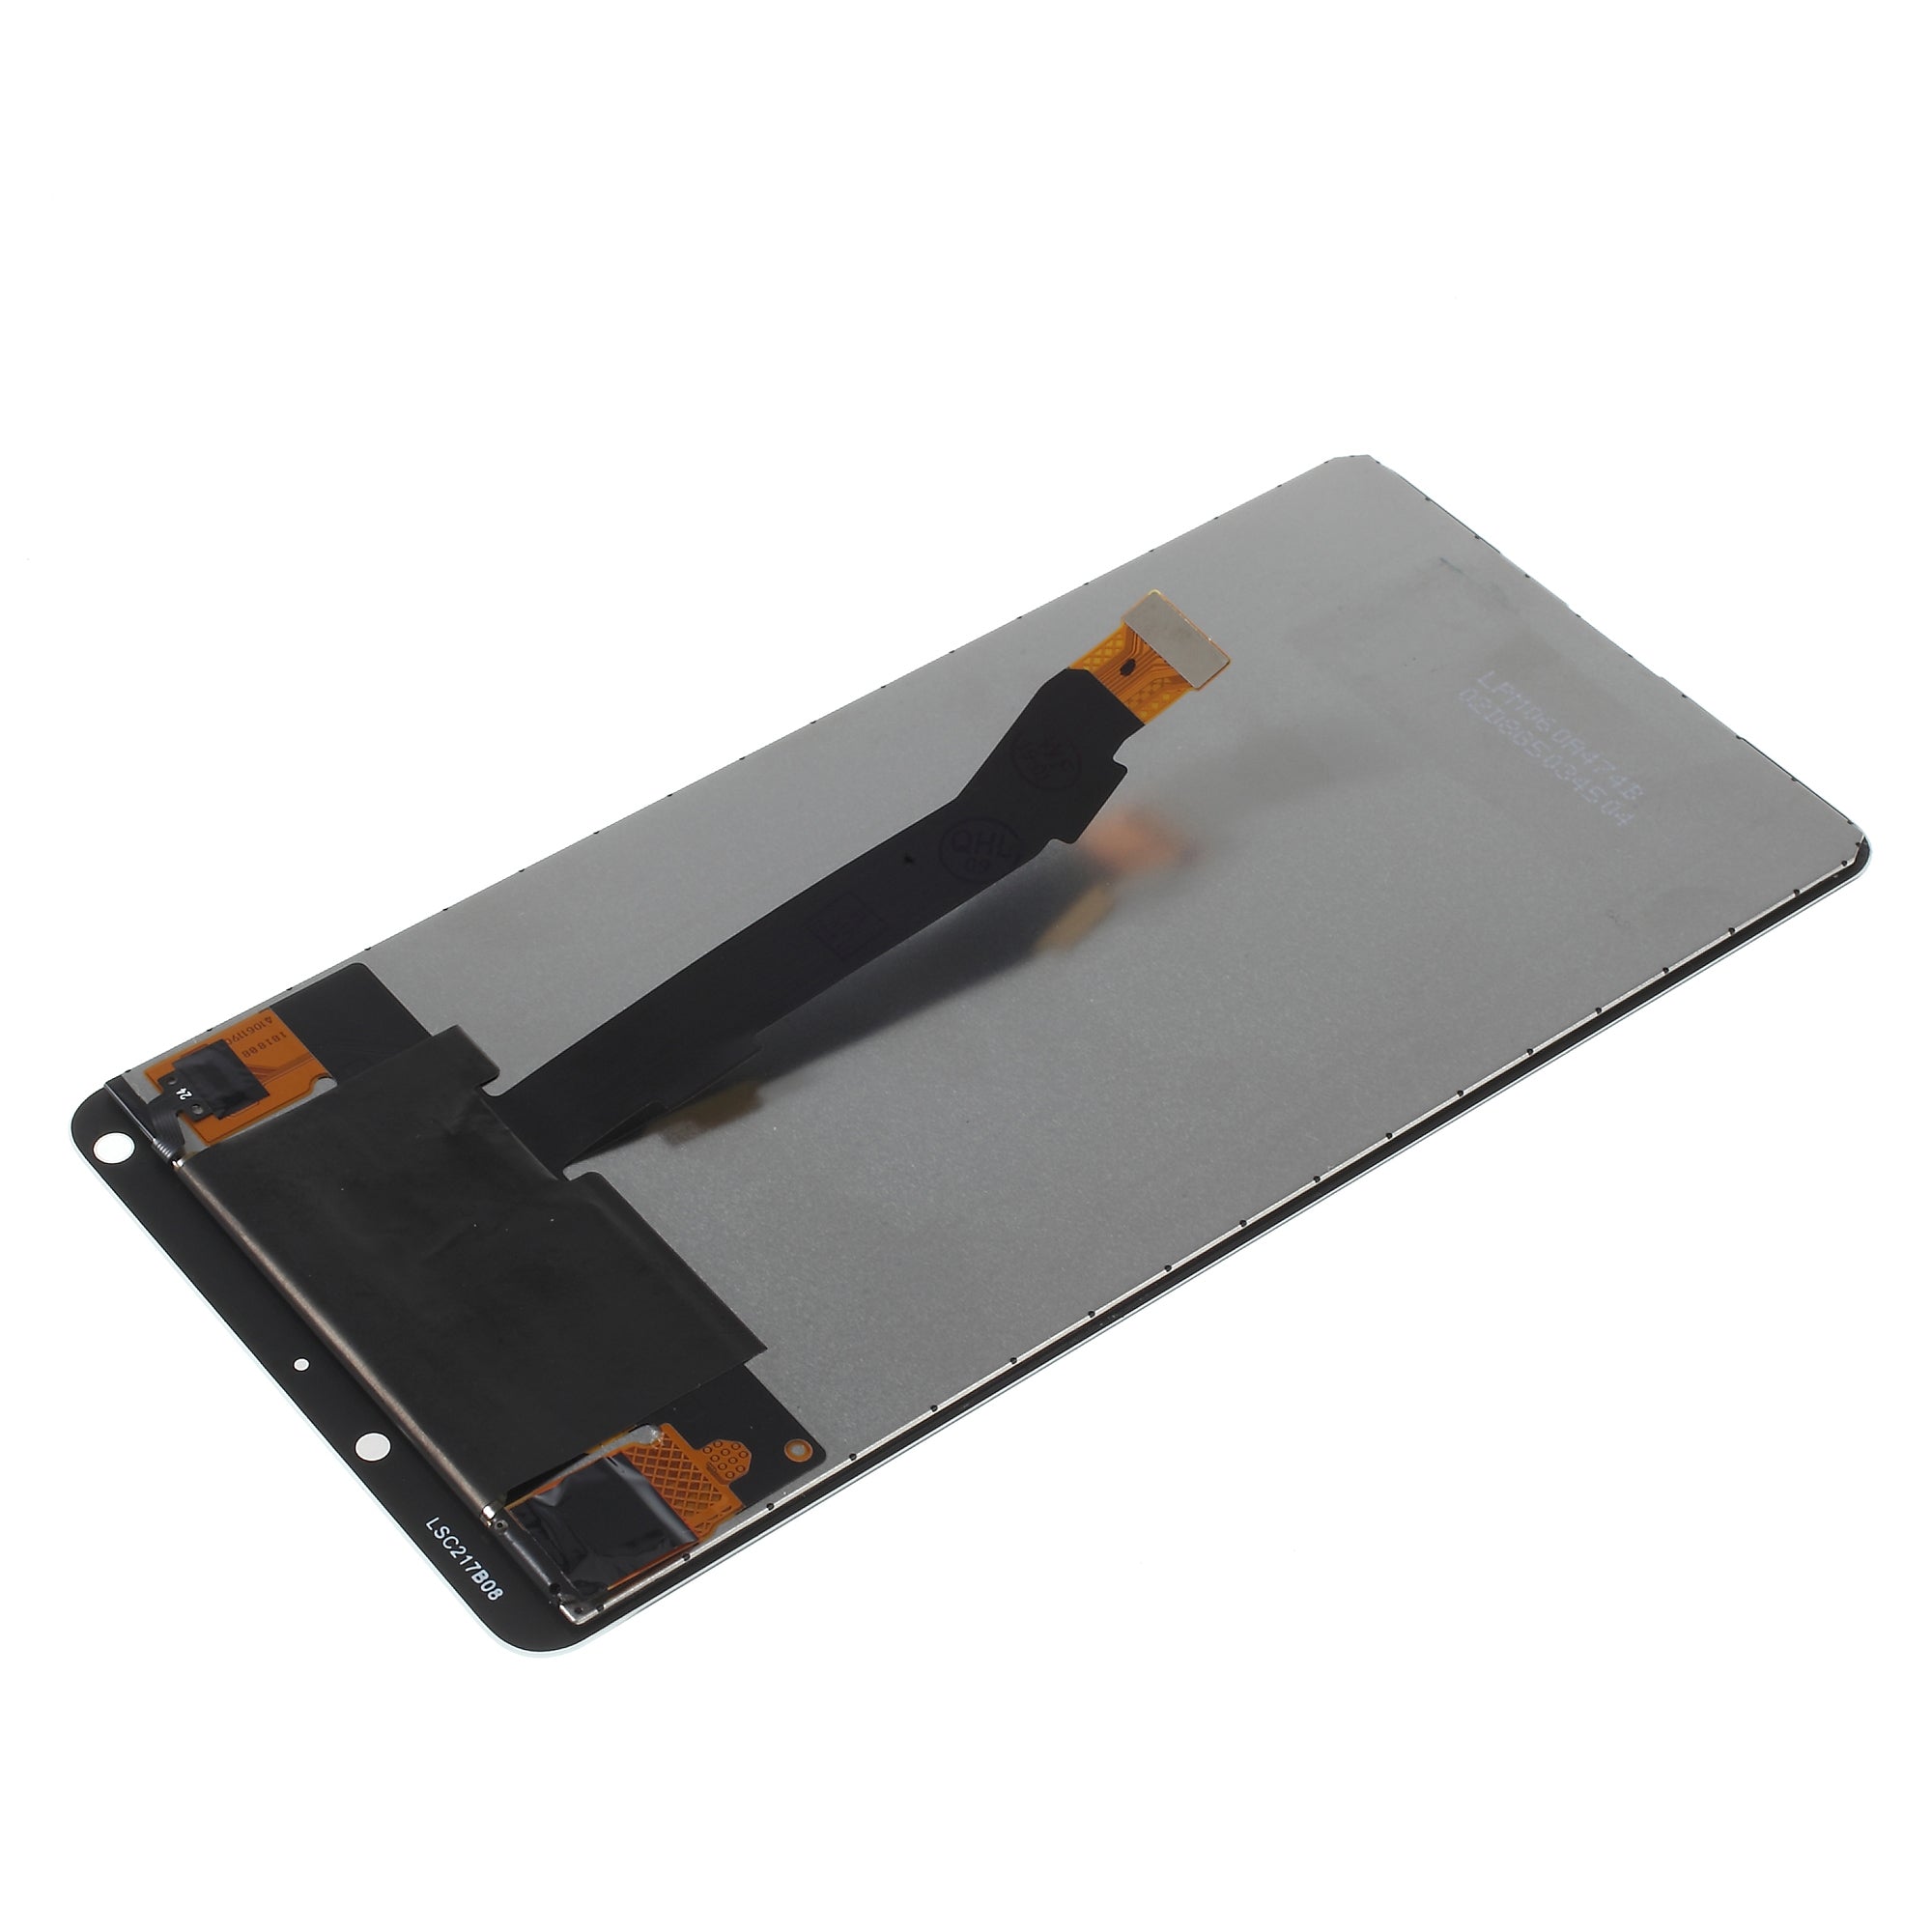 LCD Screen and Digitizer Assembly Replace Part (without Logo) for Xiaomi Mi Mix 2s - White